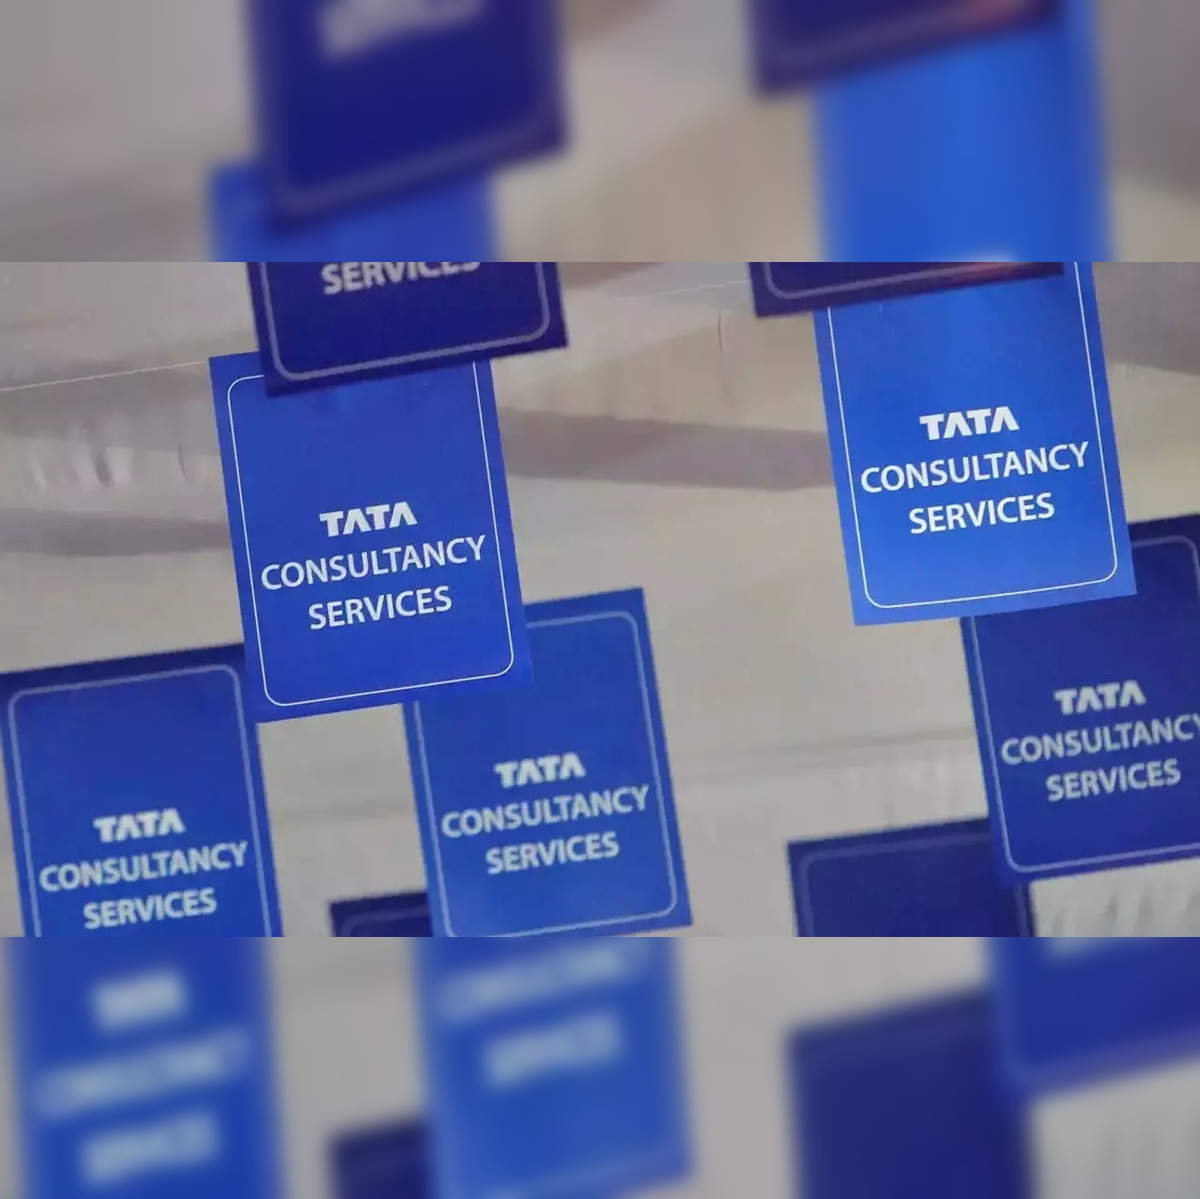 tcs: TCS to unveil new operational structure with four distinct